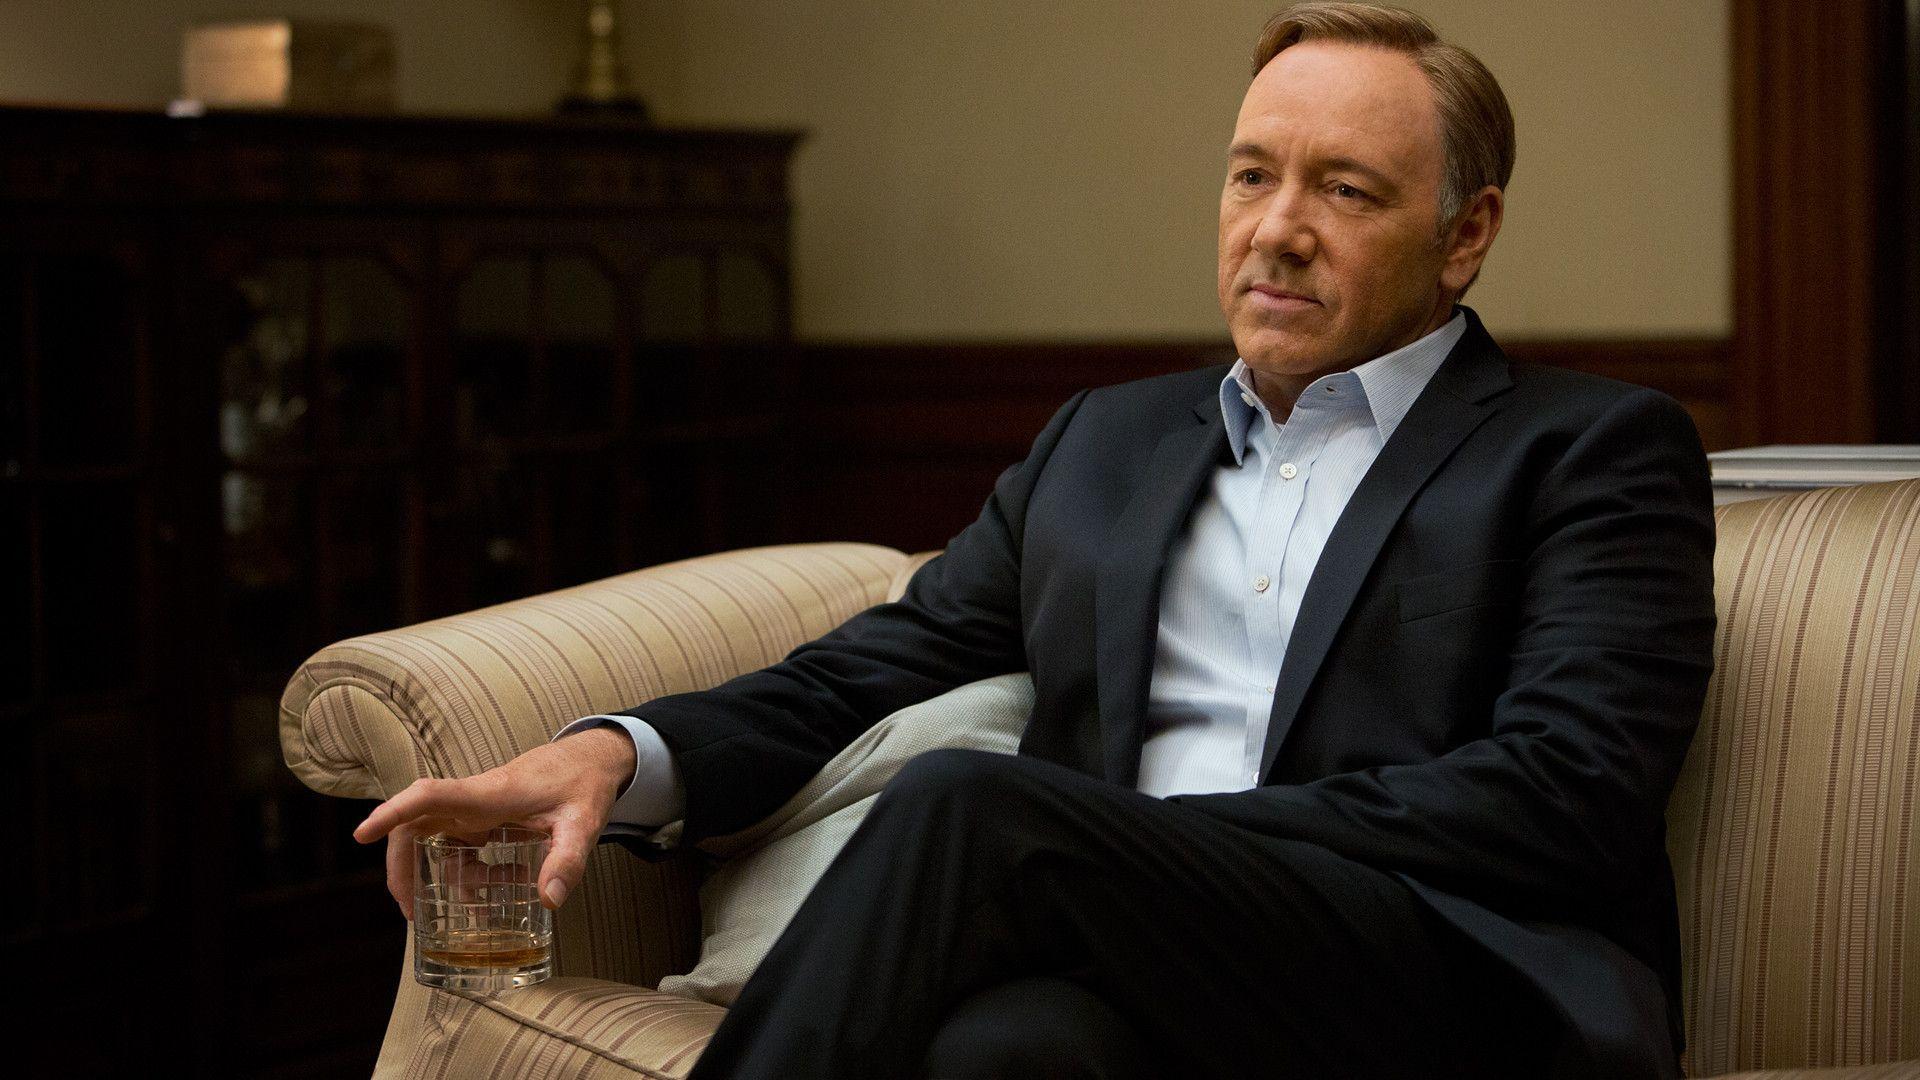 House of Cards wallpaper HD background download Facebook Covers